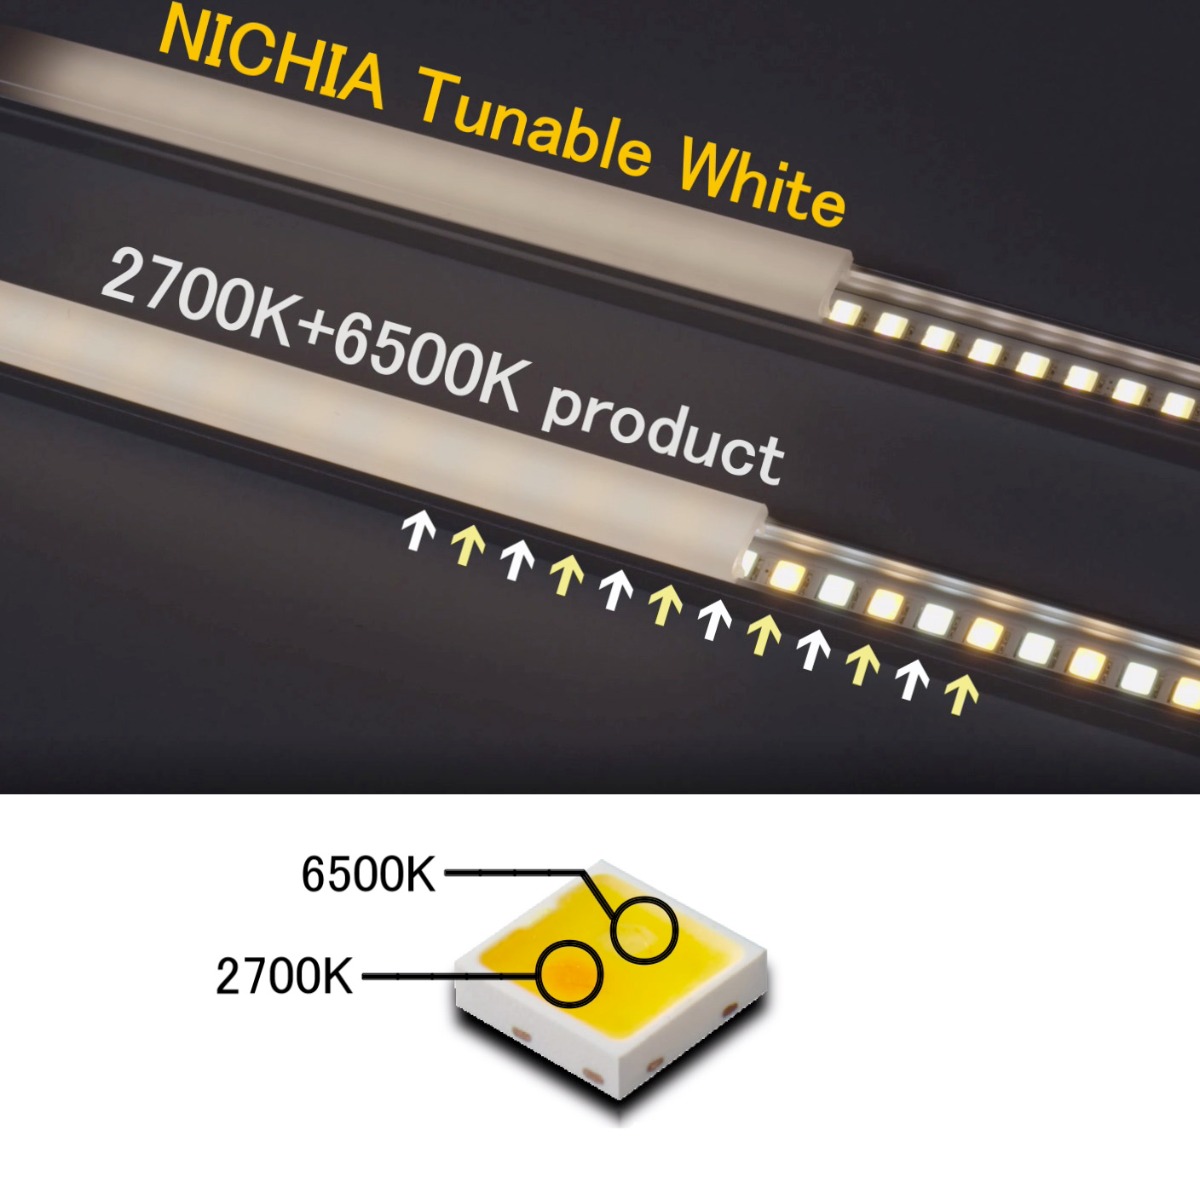 LumiFlexTW-1080 Nichia LED Strip 2 in 1 Tunable white CRI80 2700-6500K 4450lm 24V 34 LEDs/ft 5m/16ft reel (270lm/ft and 2.32W/ft) 